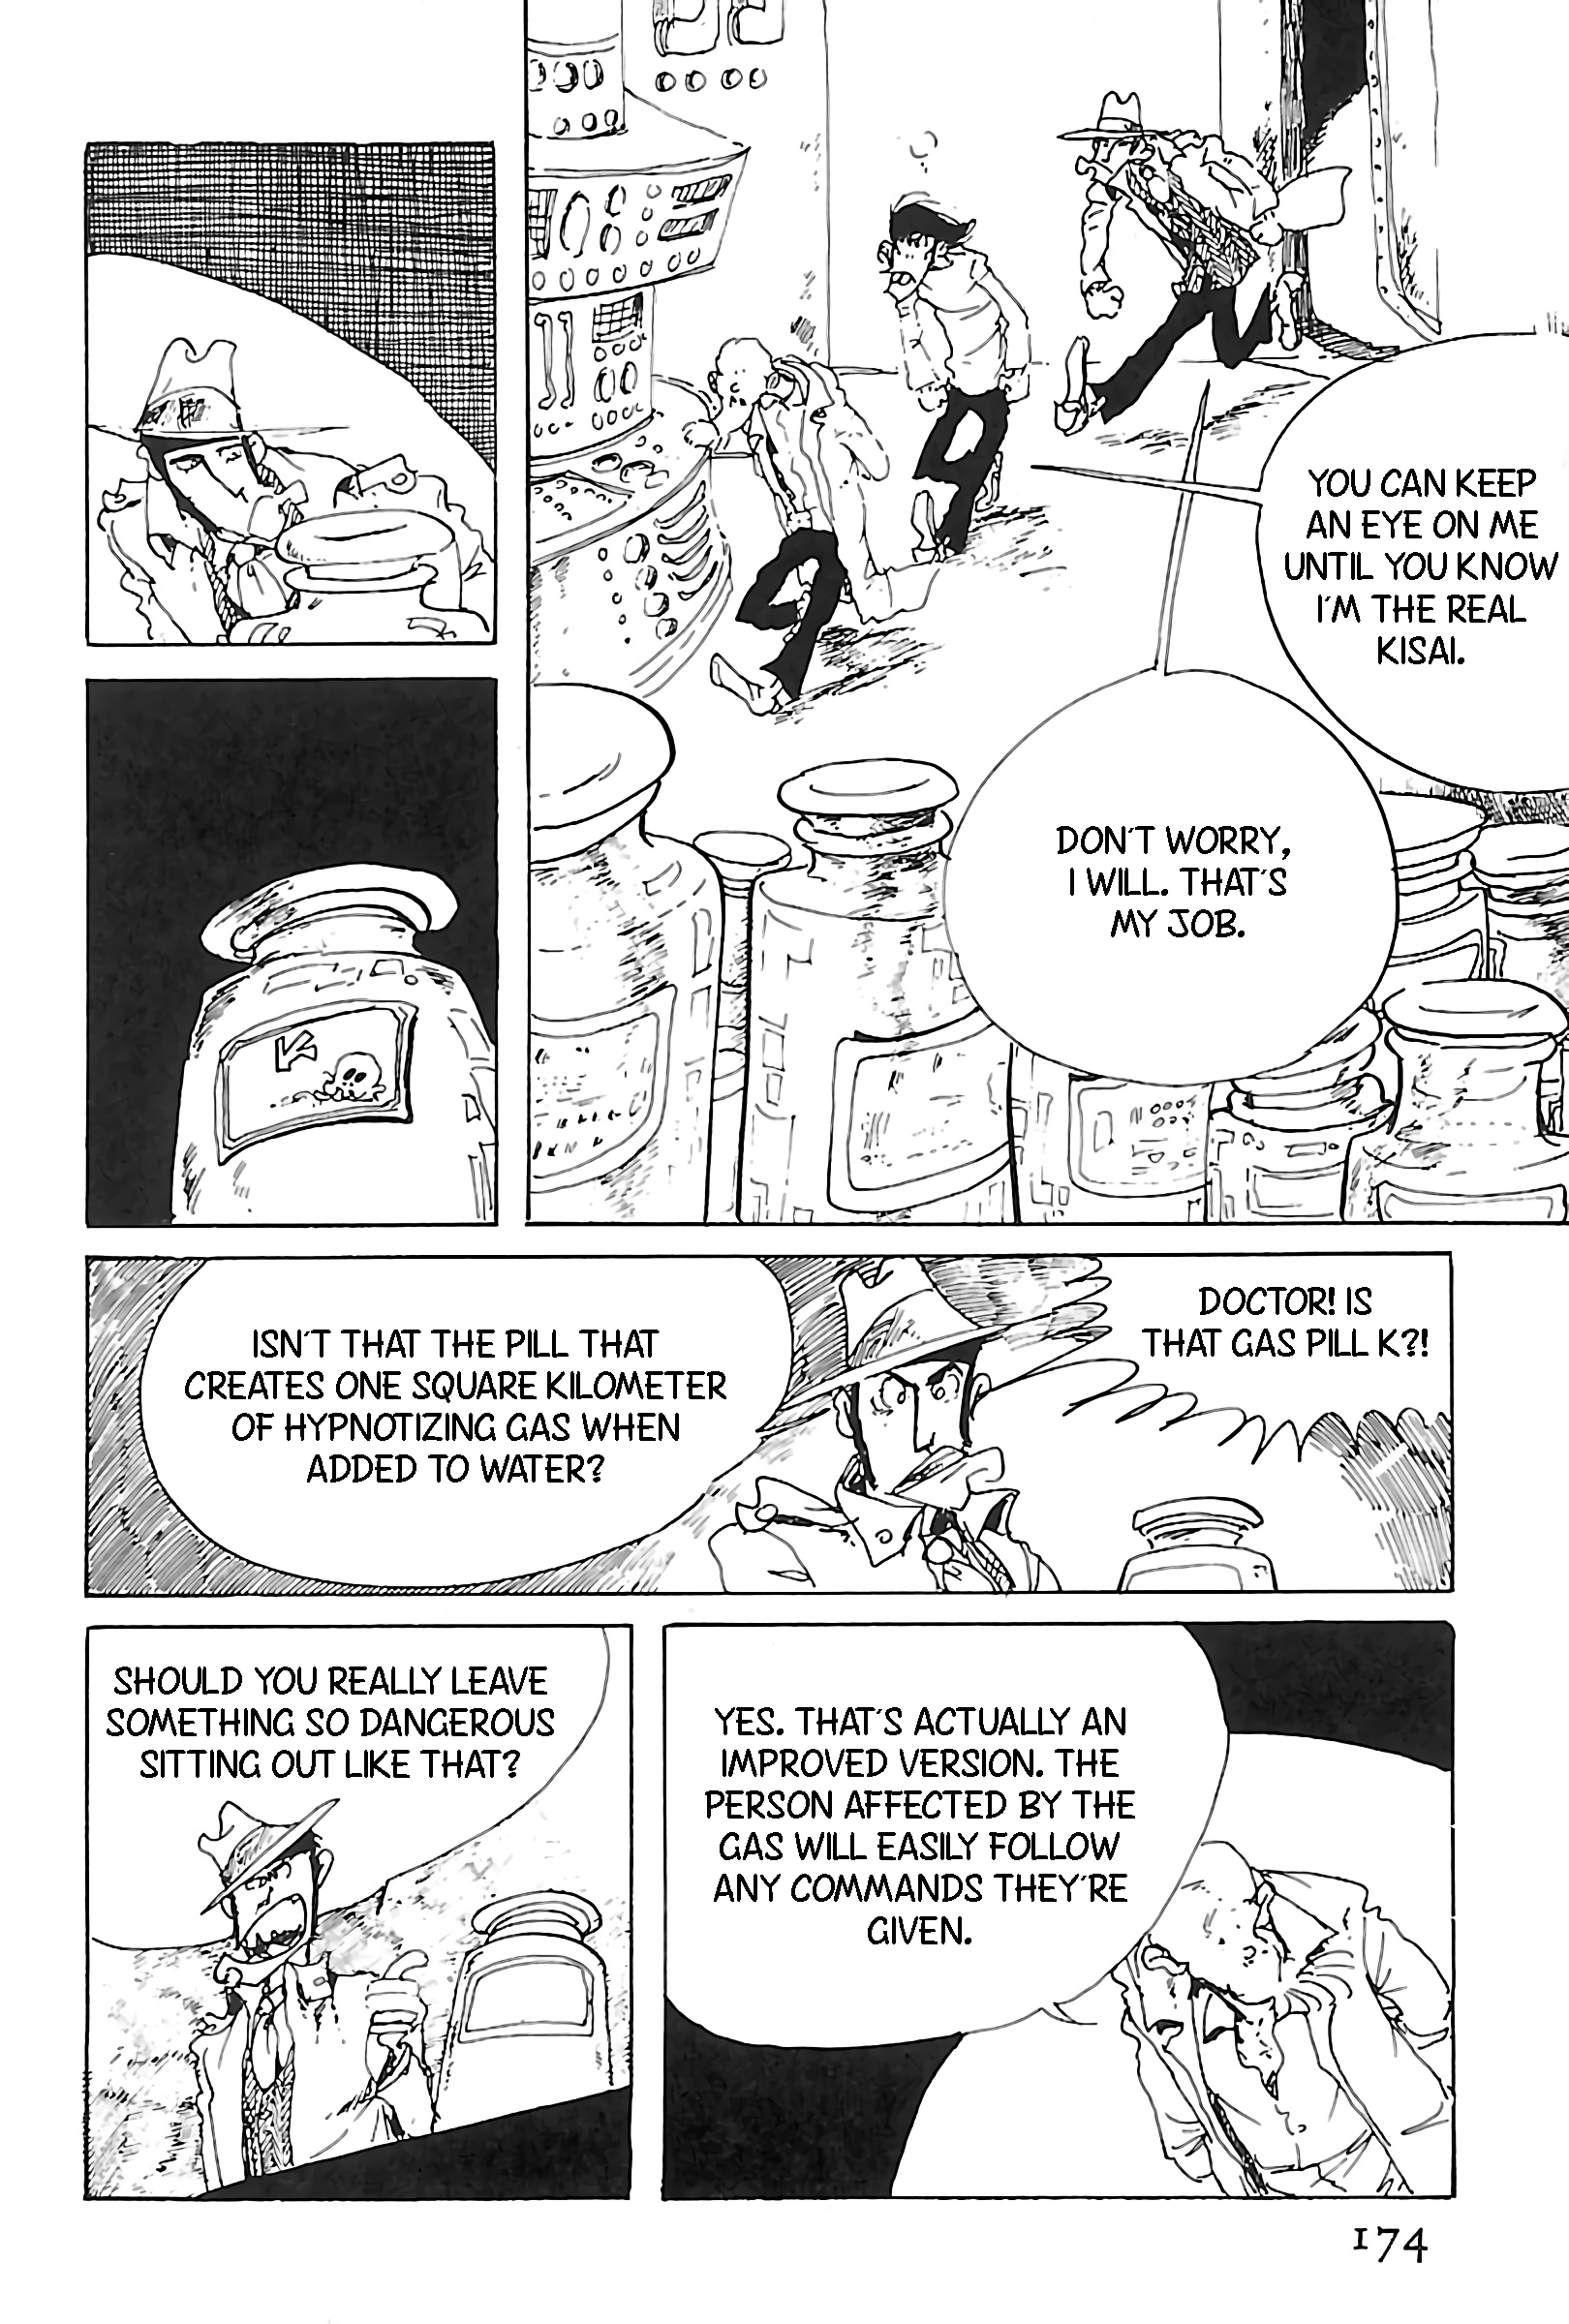 Lupin Iii: World’S Most Wanted Vol.9 Chapter 96